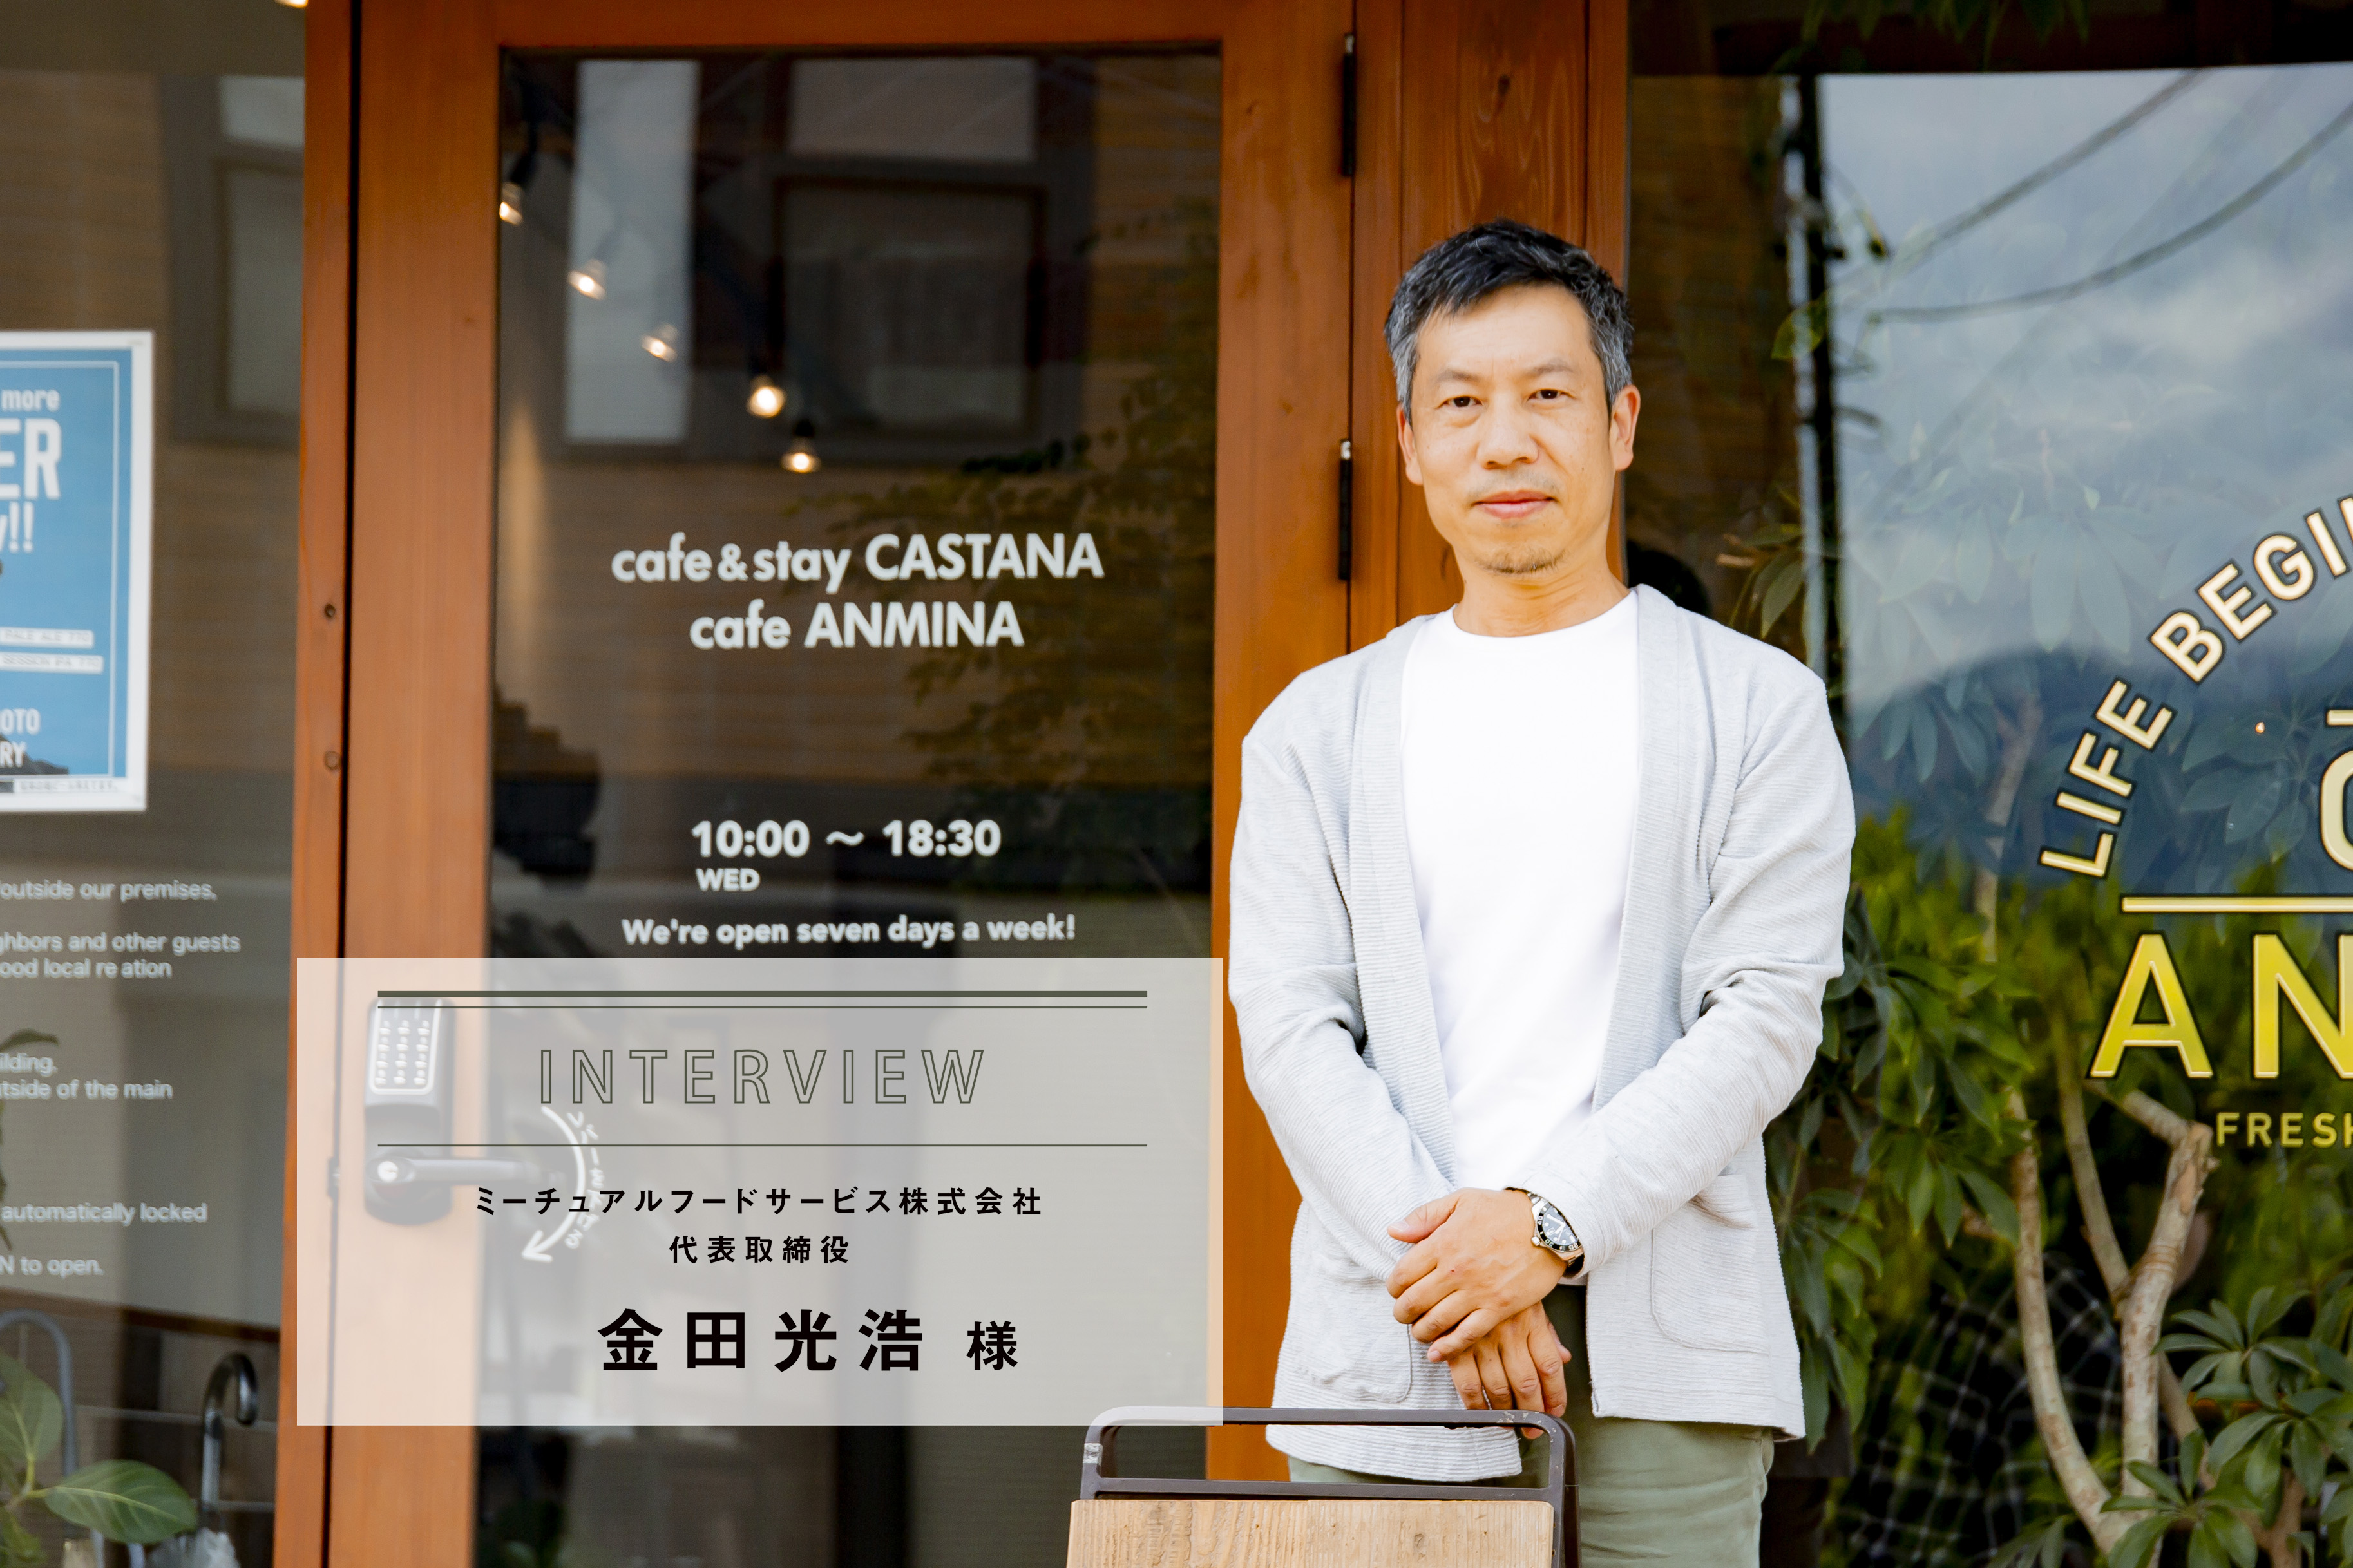 INTERVIEW｜cafe and stay CASTANA 様